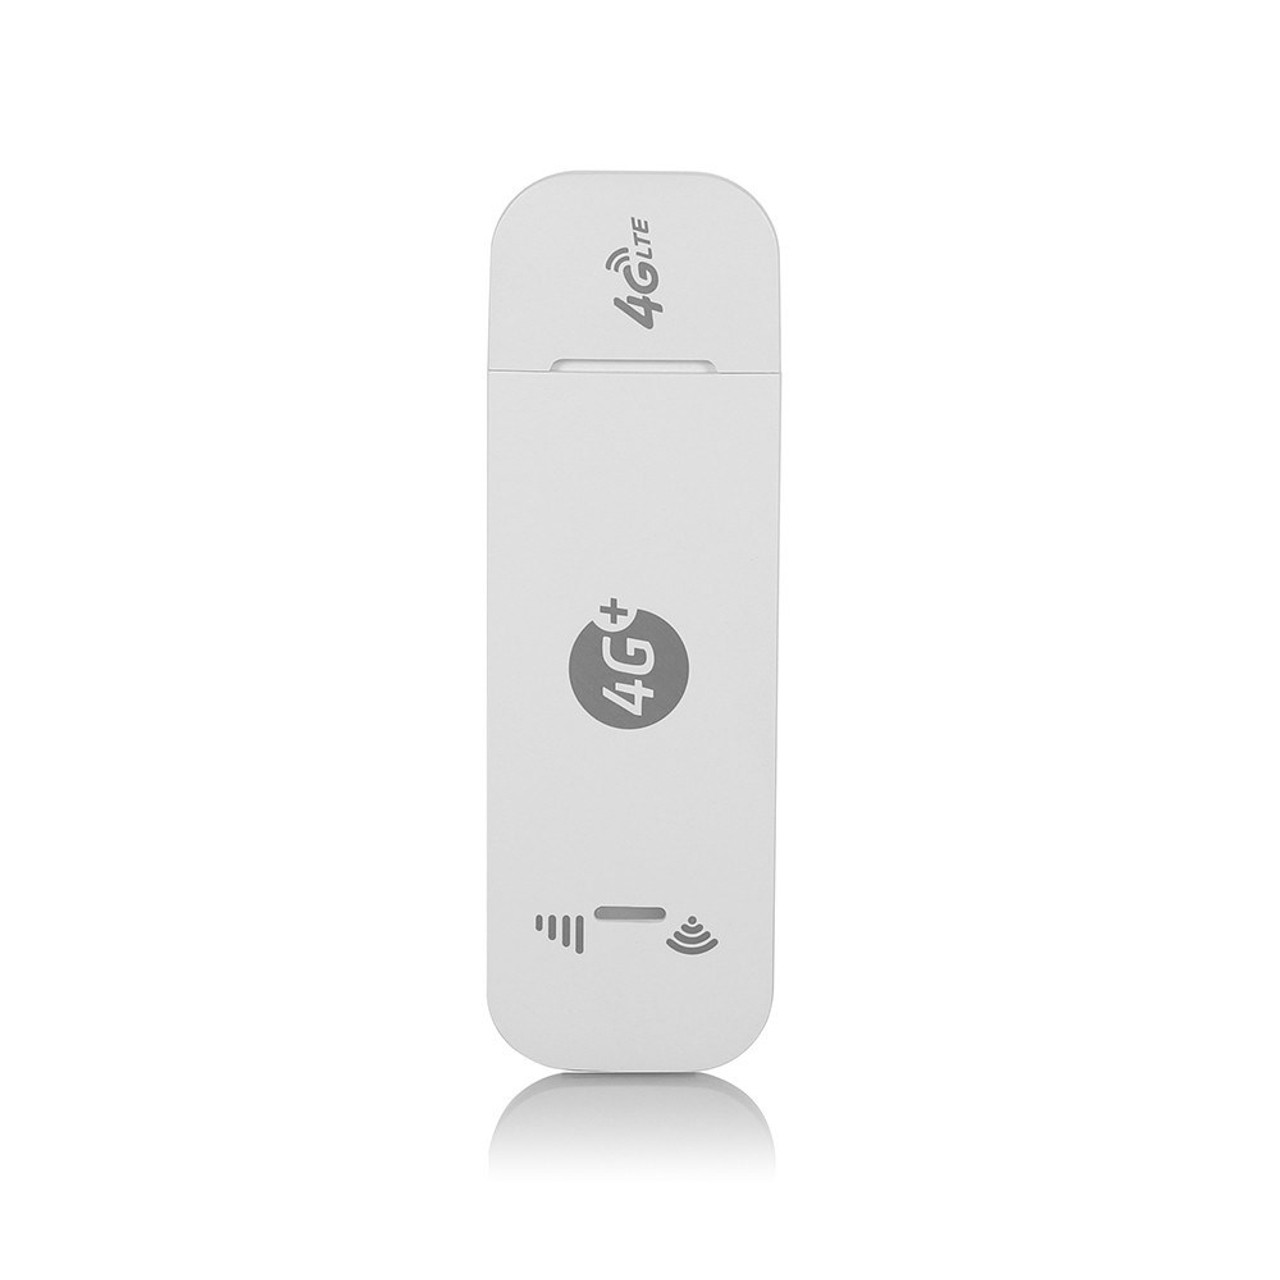 4G LTE USB Modem WiFi Dongle Mini Mobile WiFi Hotspot Router with